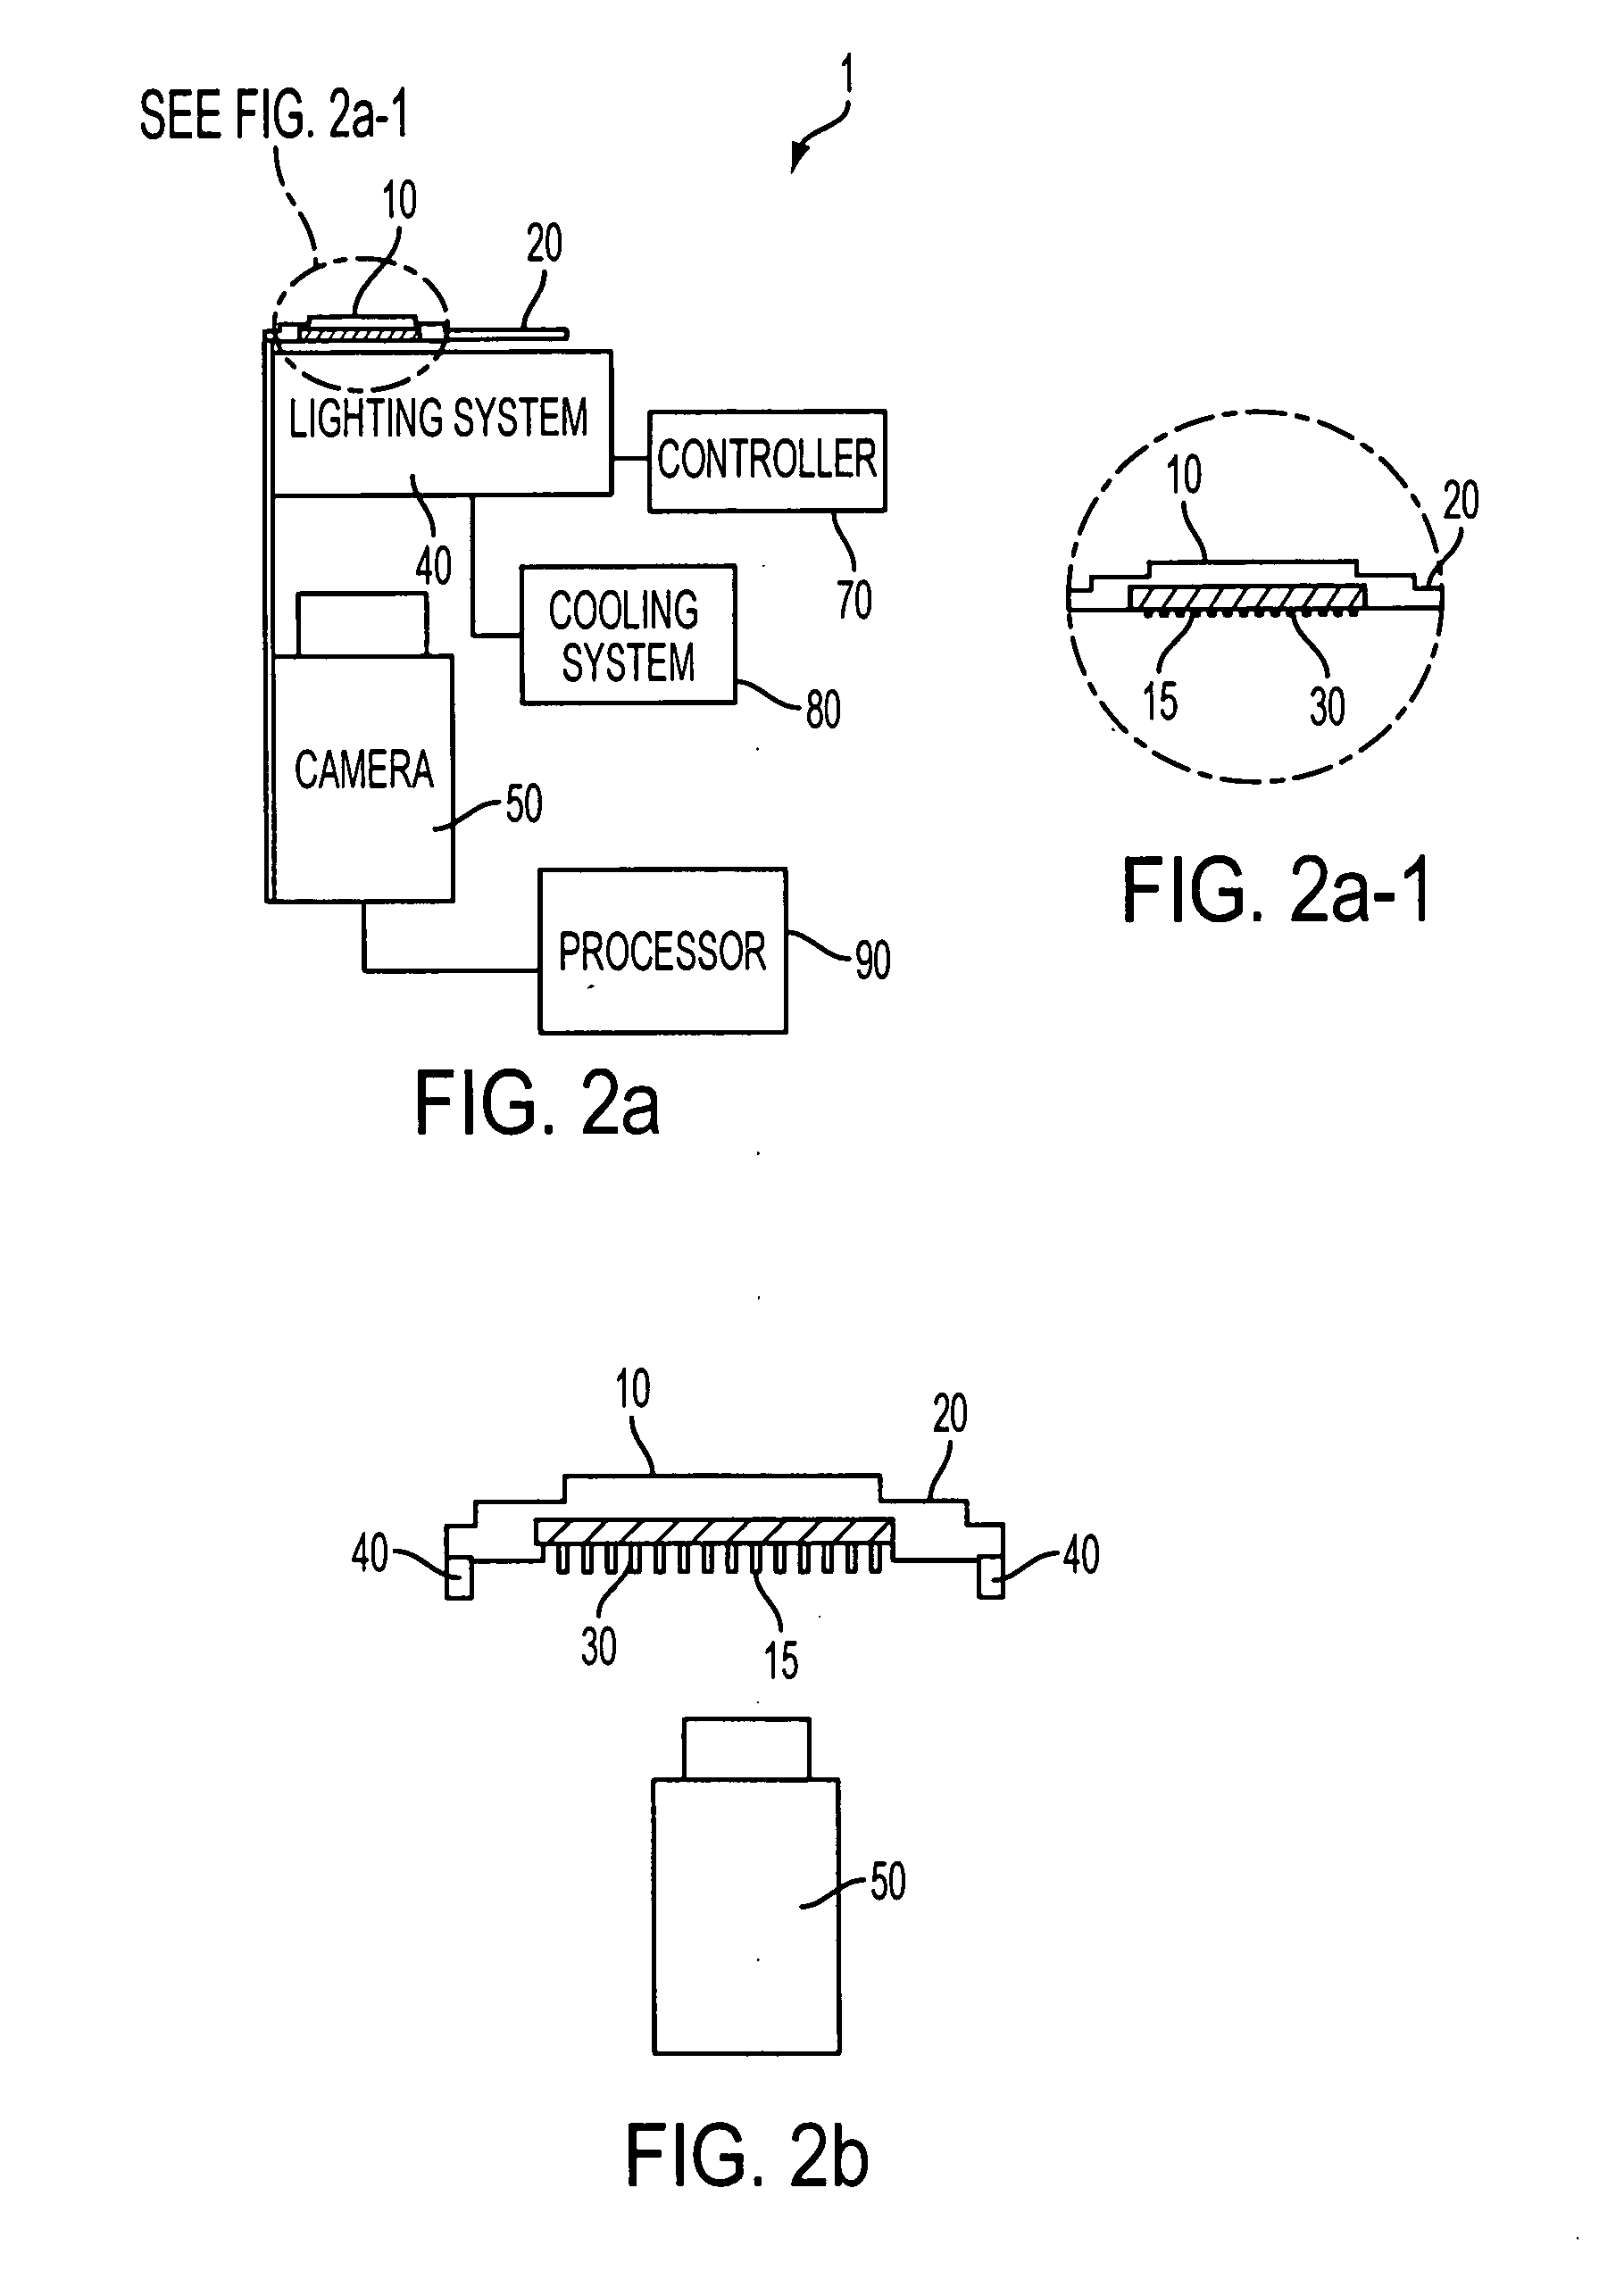 Camera based pin grid array (PGA) inspection system with pin base mask and low angle lighting